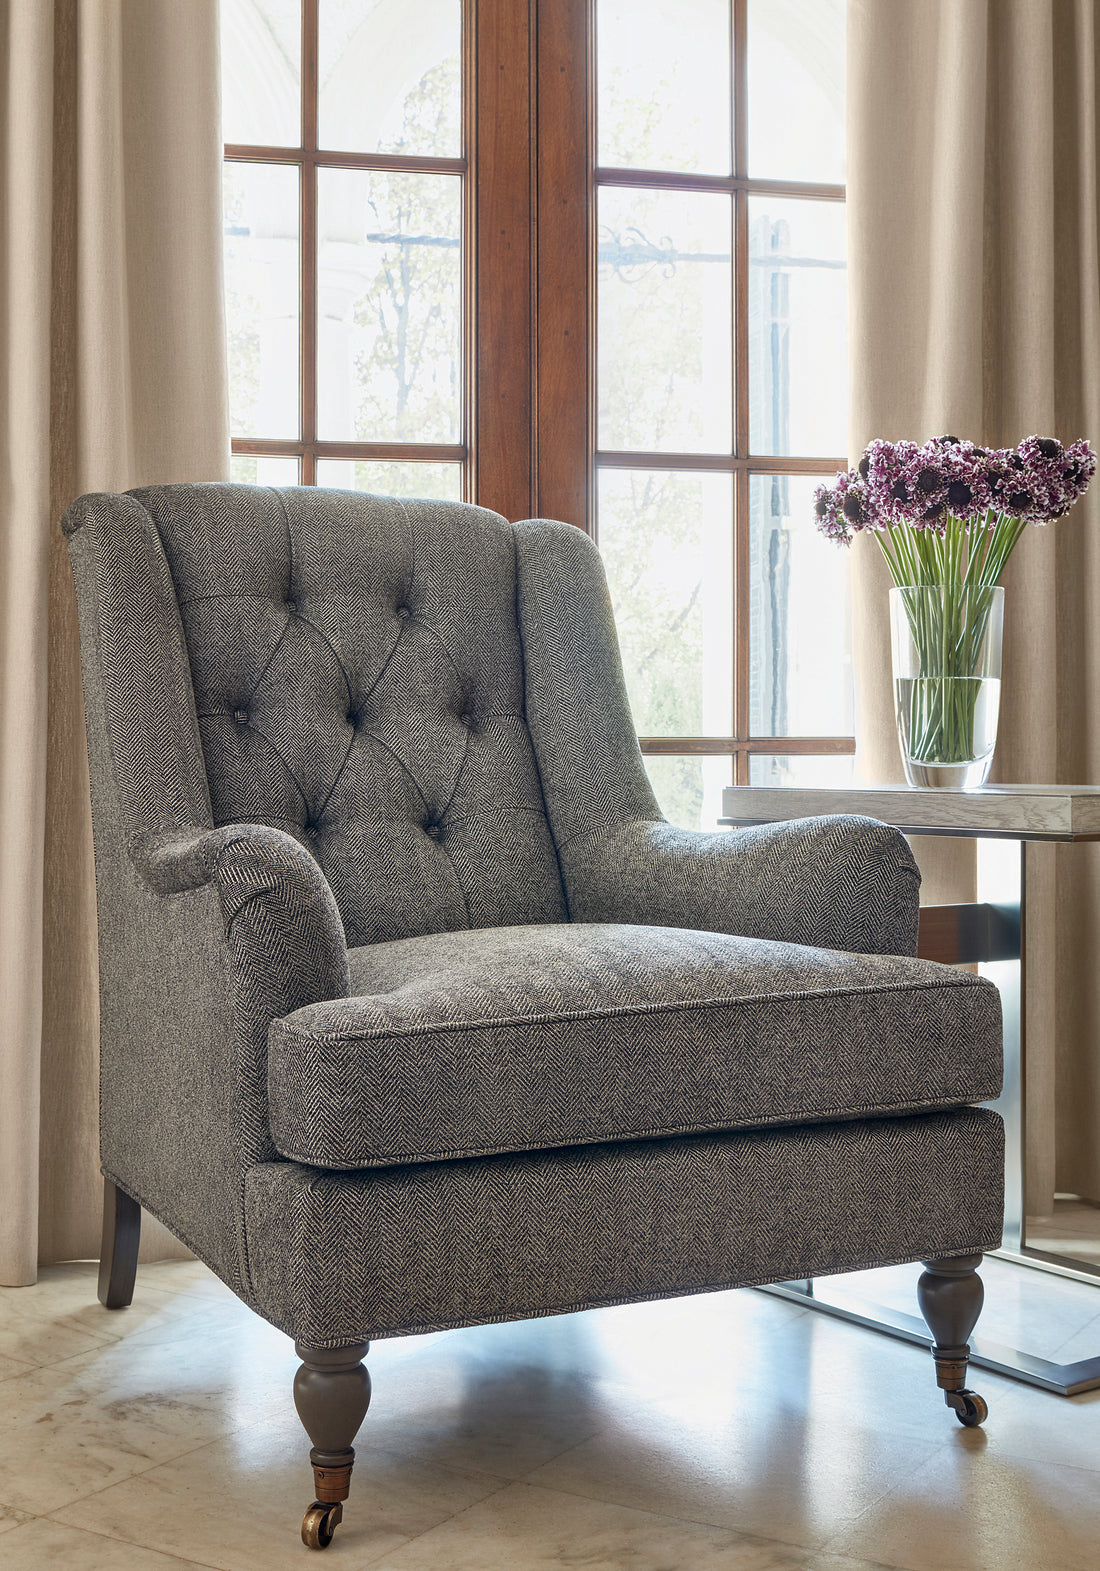 Newport Wing Chair in Hadrian Herringbone woven fabric in charcoal color - pattern number W80713 - by Thibaut in the Woven Resource Vol 11 Rialto collection